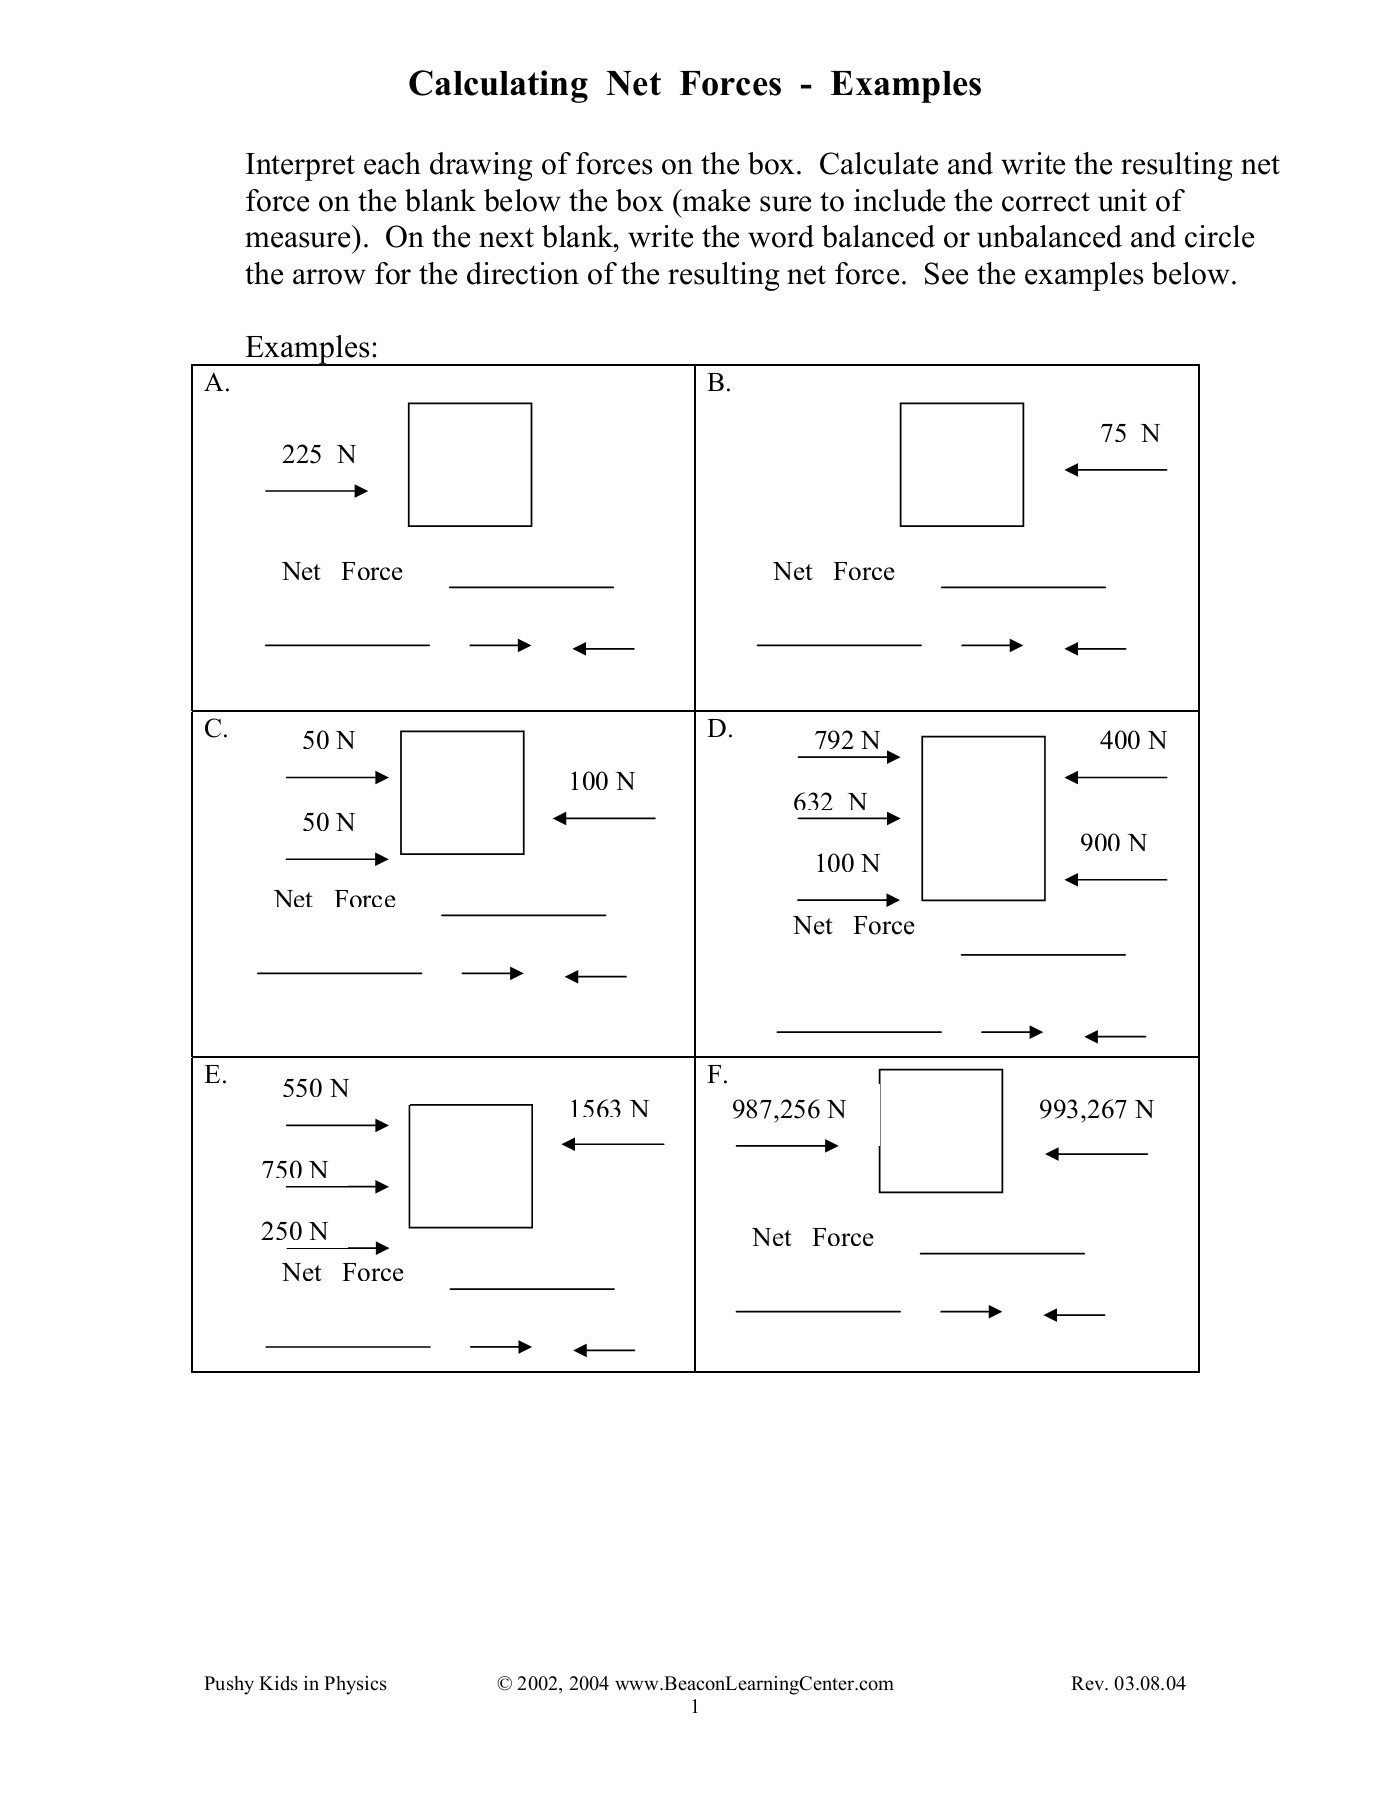 Net force Worksheet Answers Calculating Net forces Examples Pages 1 3 Text Version